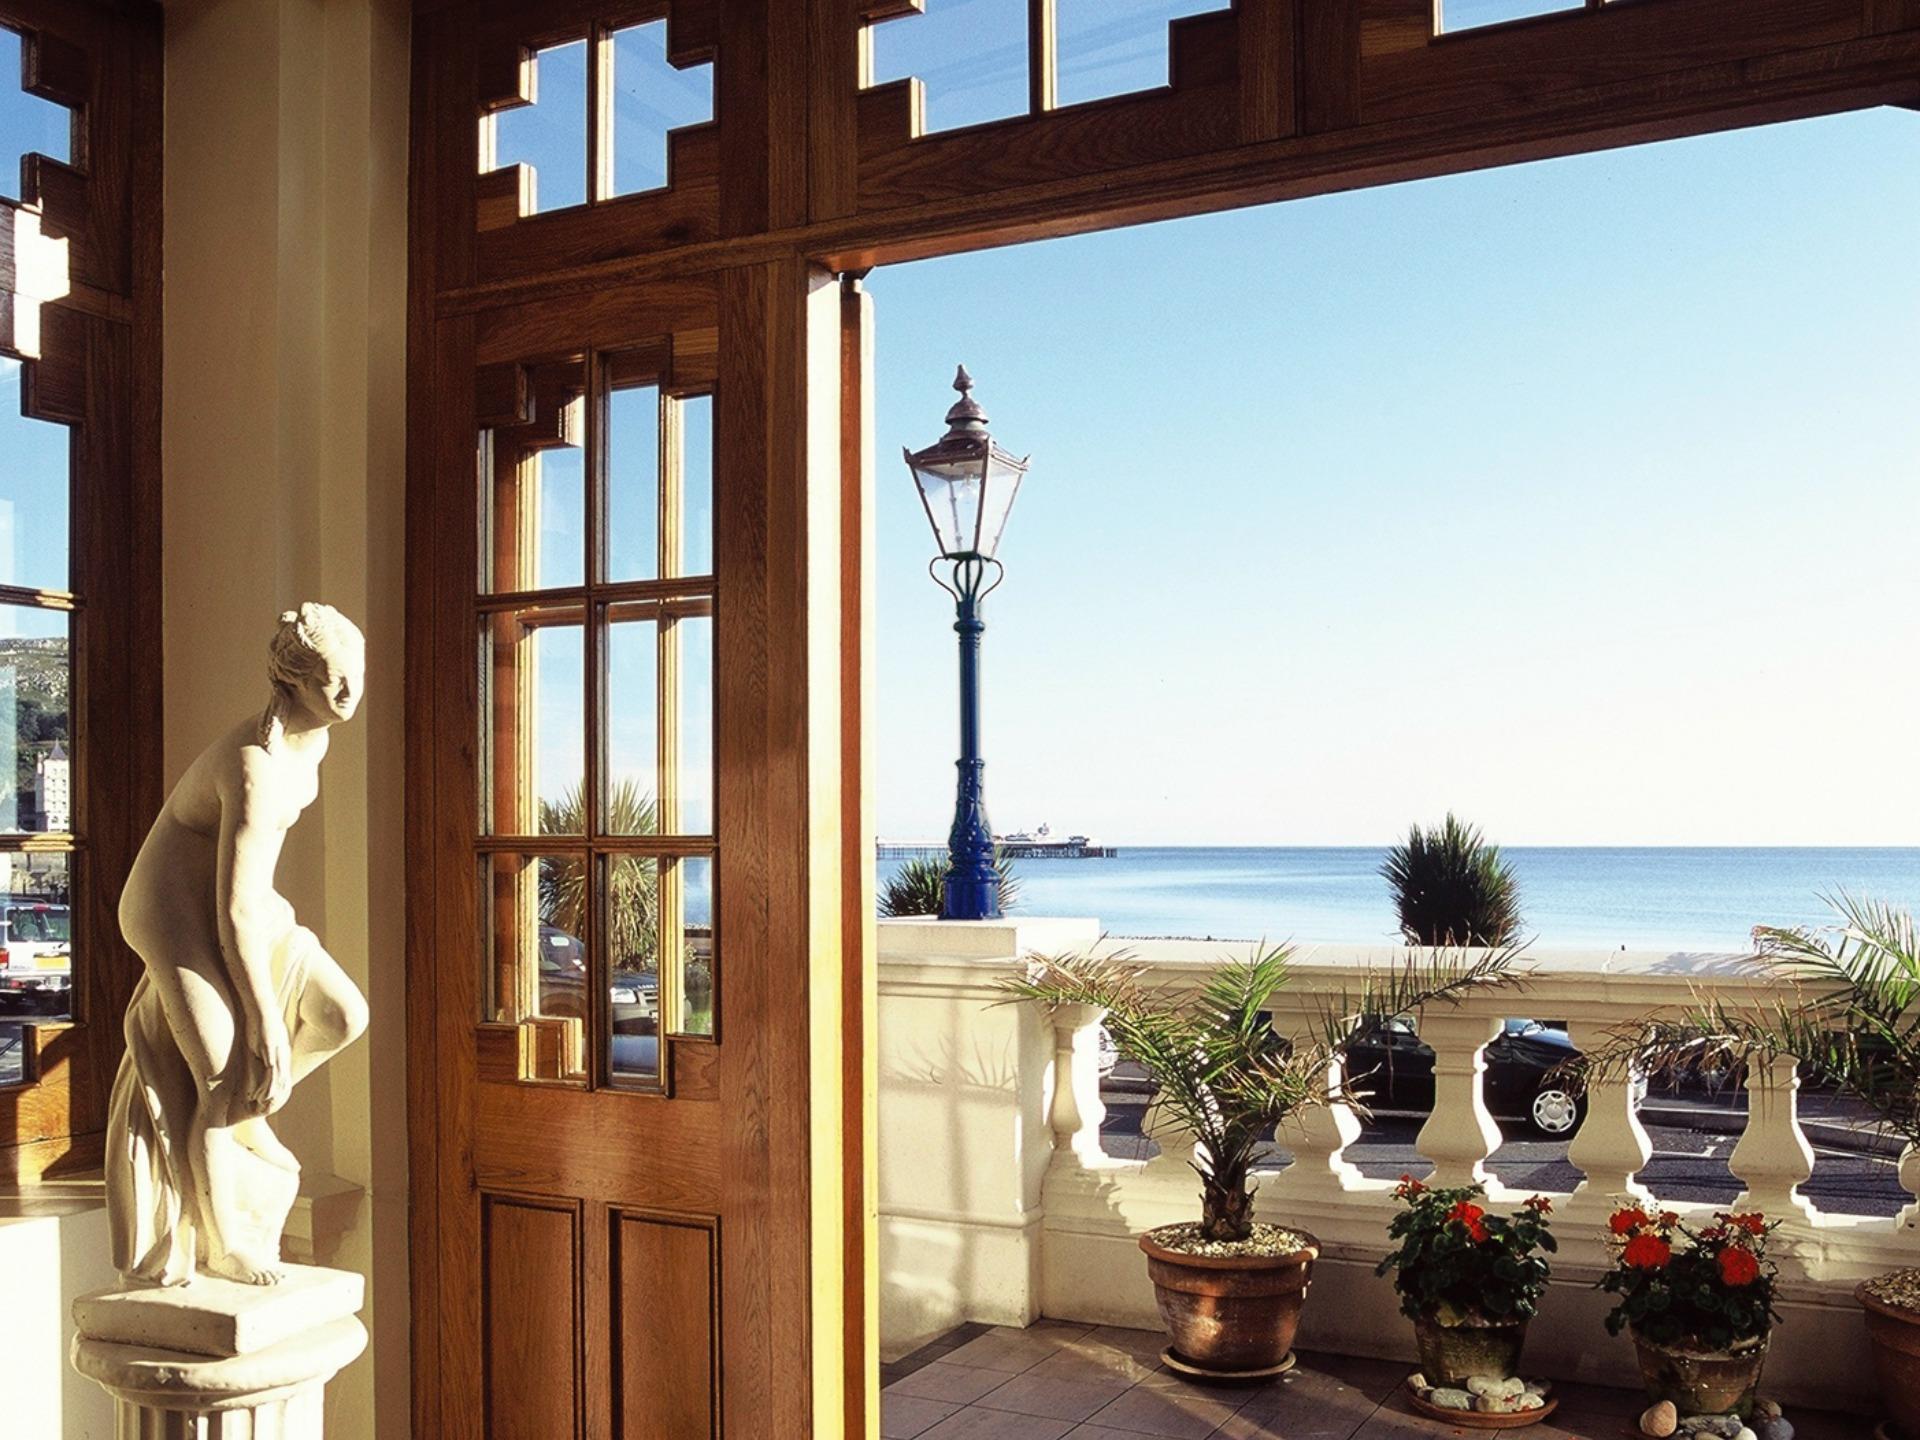 The Imperial's stunning views of the bay